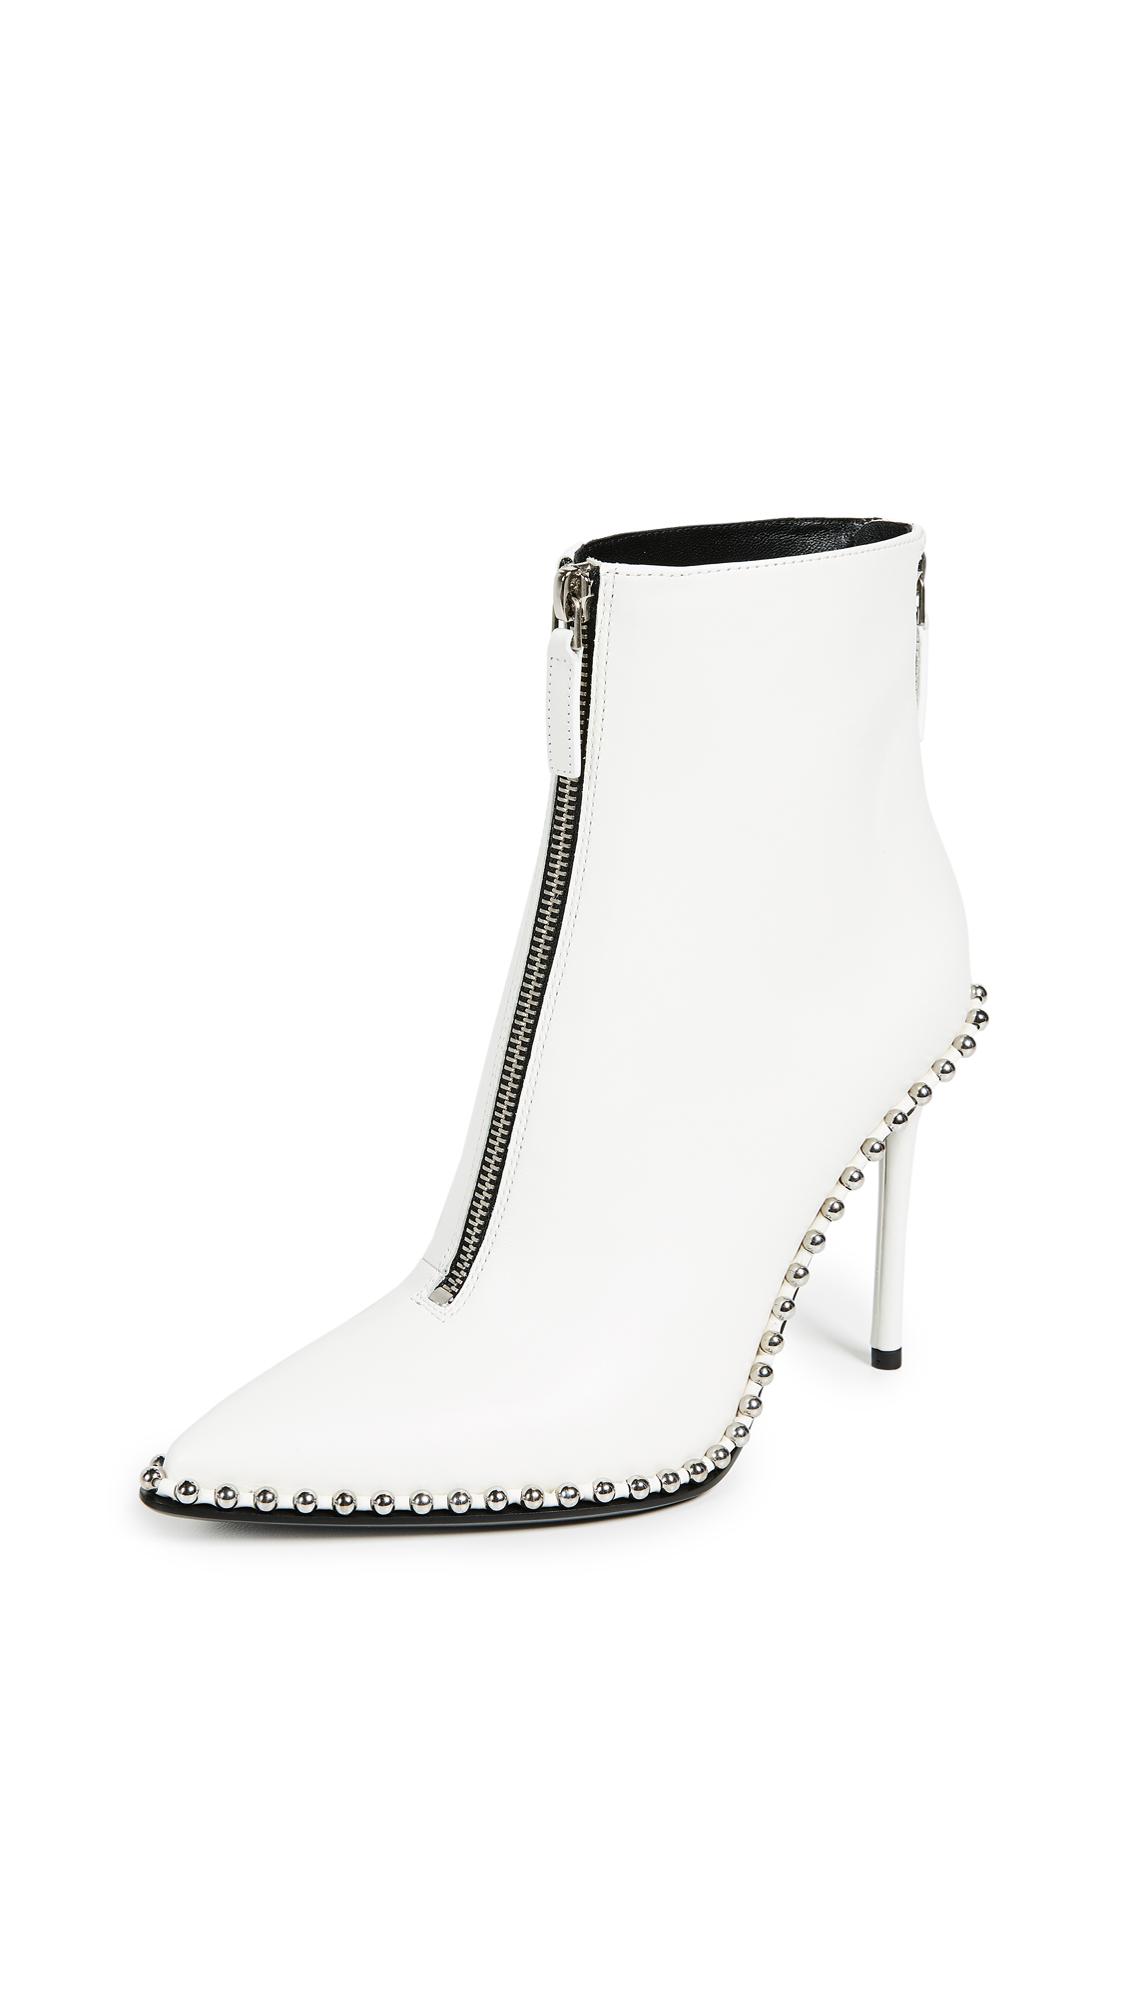 Alexander Wang Eri Boots in White | Lyst